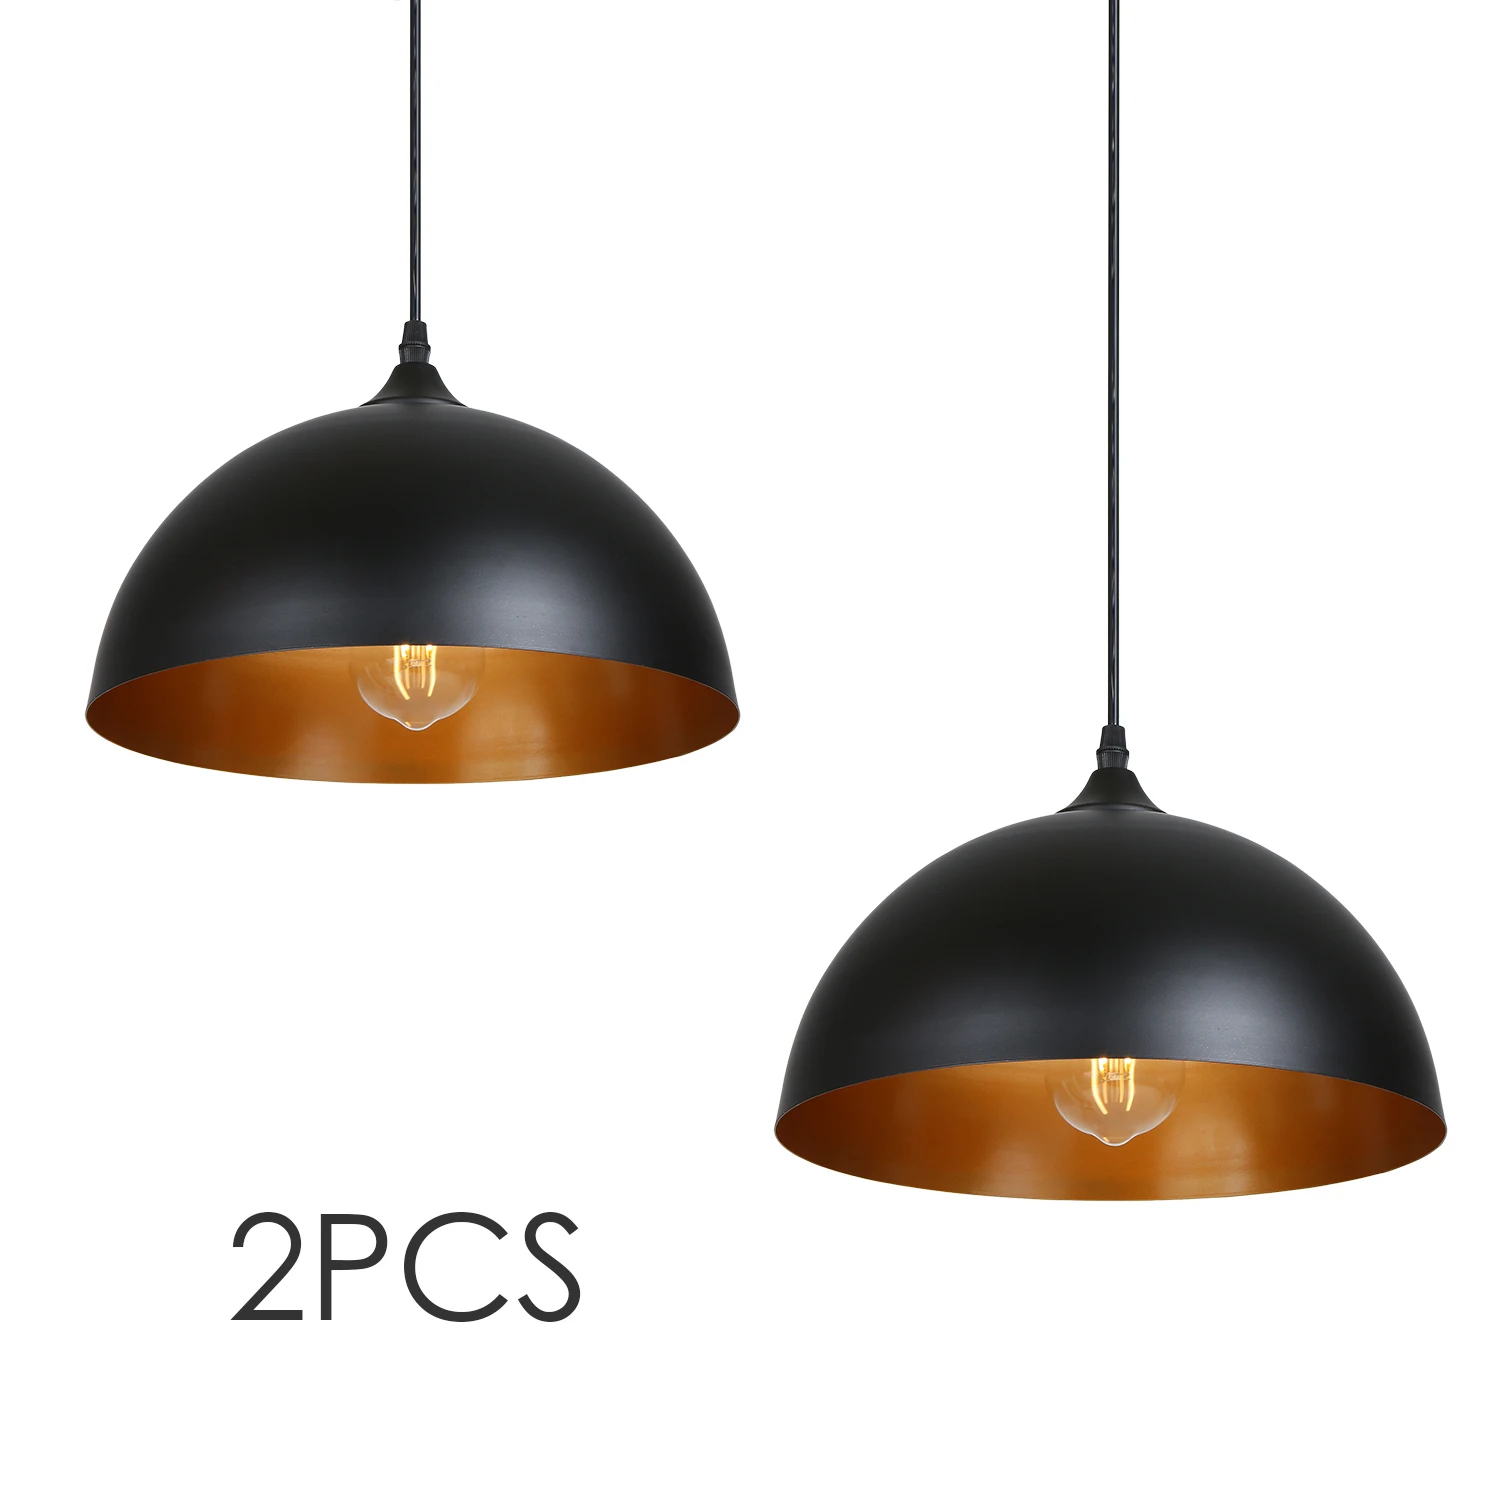 2Pcs Metal Pendant Lights Classic Black Lampshades Industrial Hanging Pendant Lamp for Kitchen Dining Living Room Restaurant